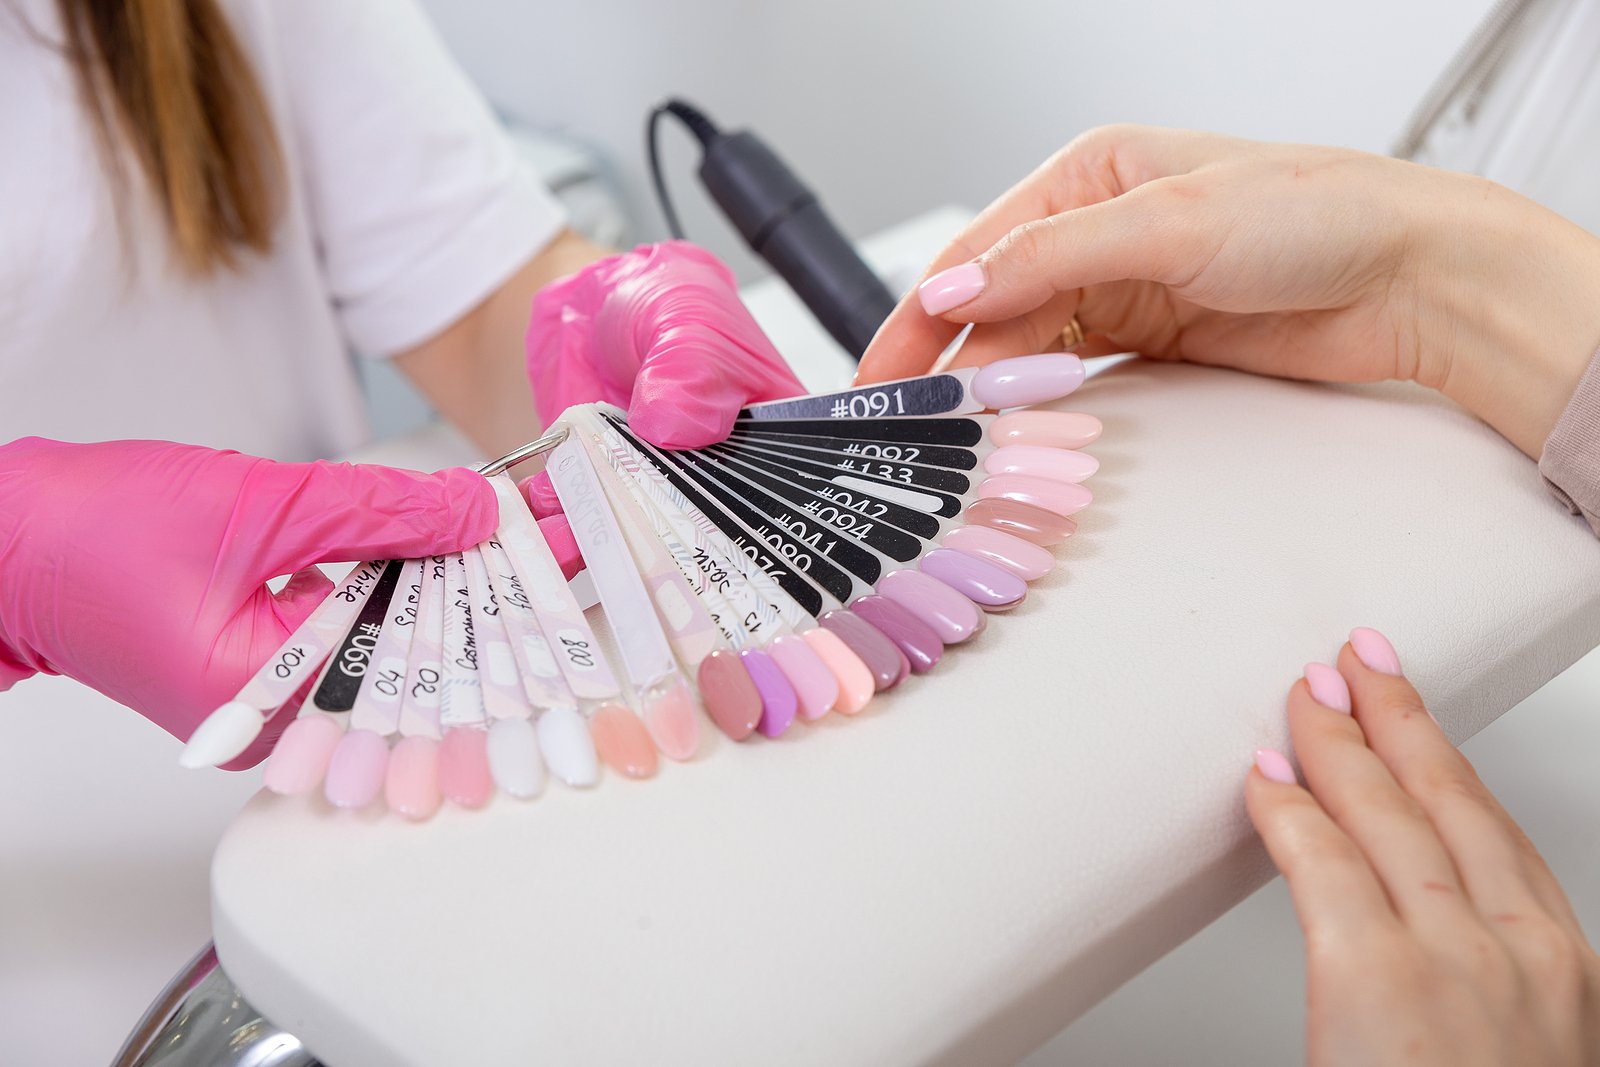 Nail technician displays nail polish color options to a client